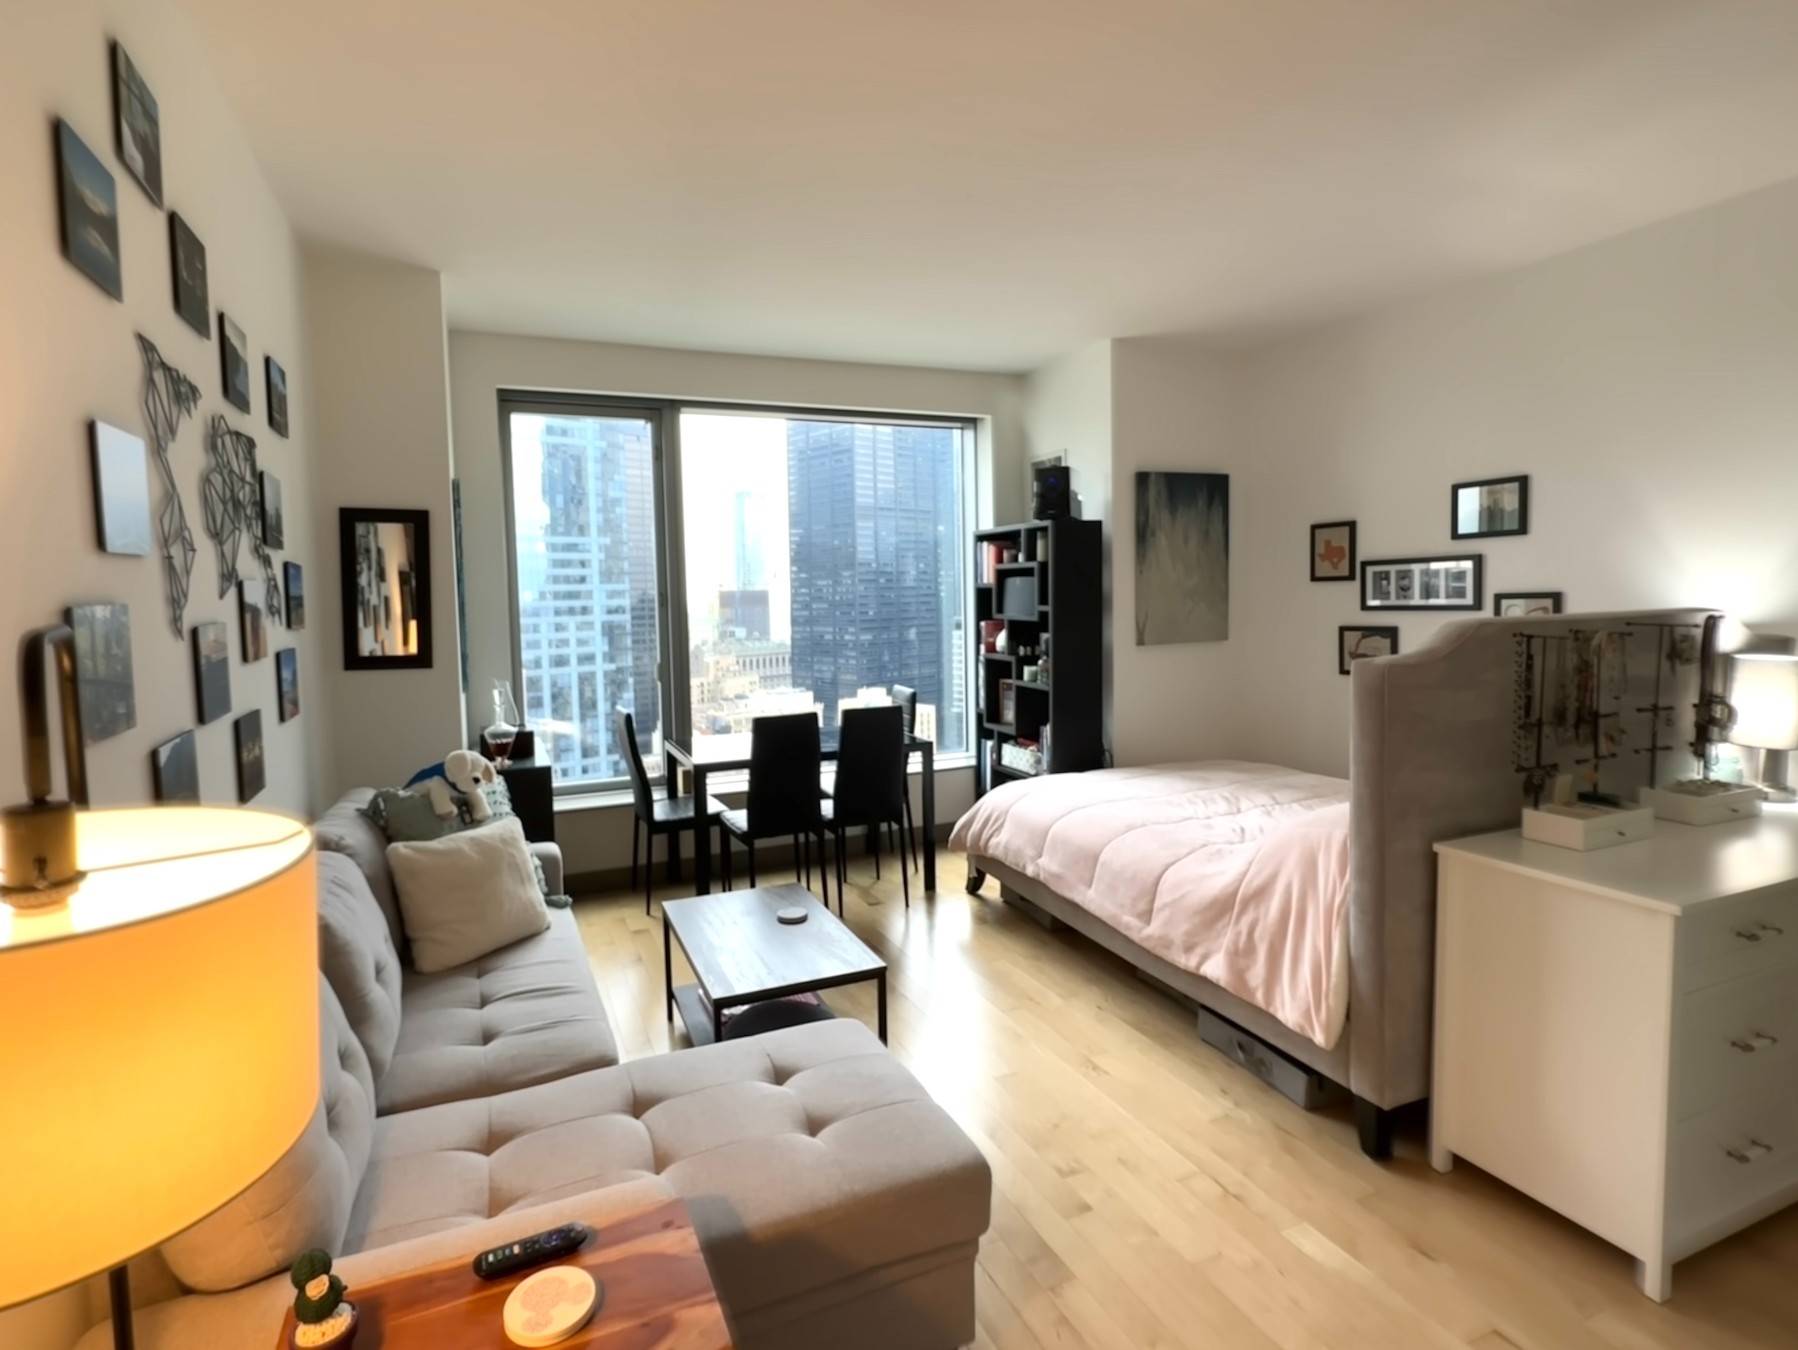 Gorgeous rent stabilized, high floor, south facing studio at the highly coveted, 8 spruces street.